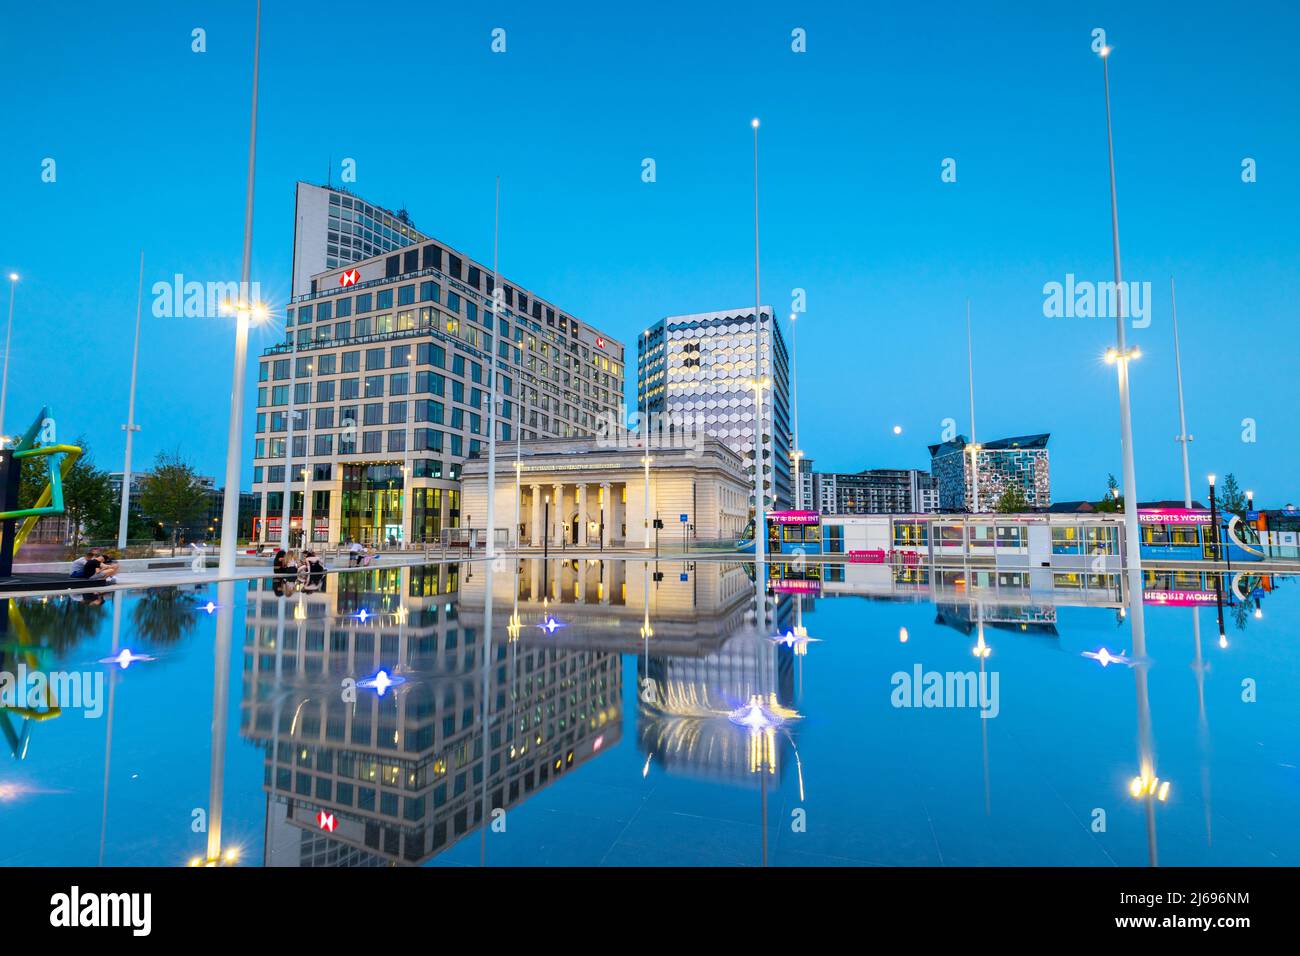 The Exchange and office Blocks, Centenary Square, Birmingham, Angleterre, Royaume-Uni, Europe Banque D'Images